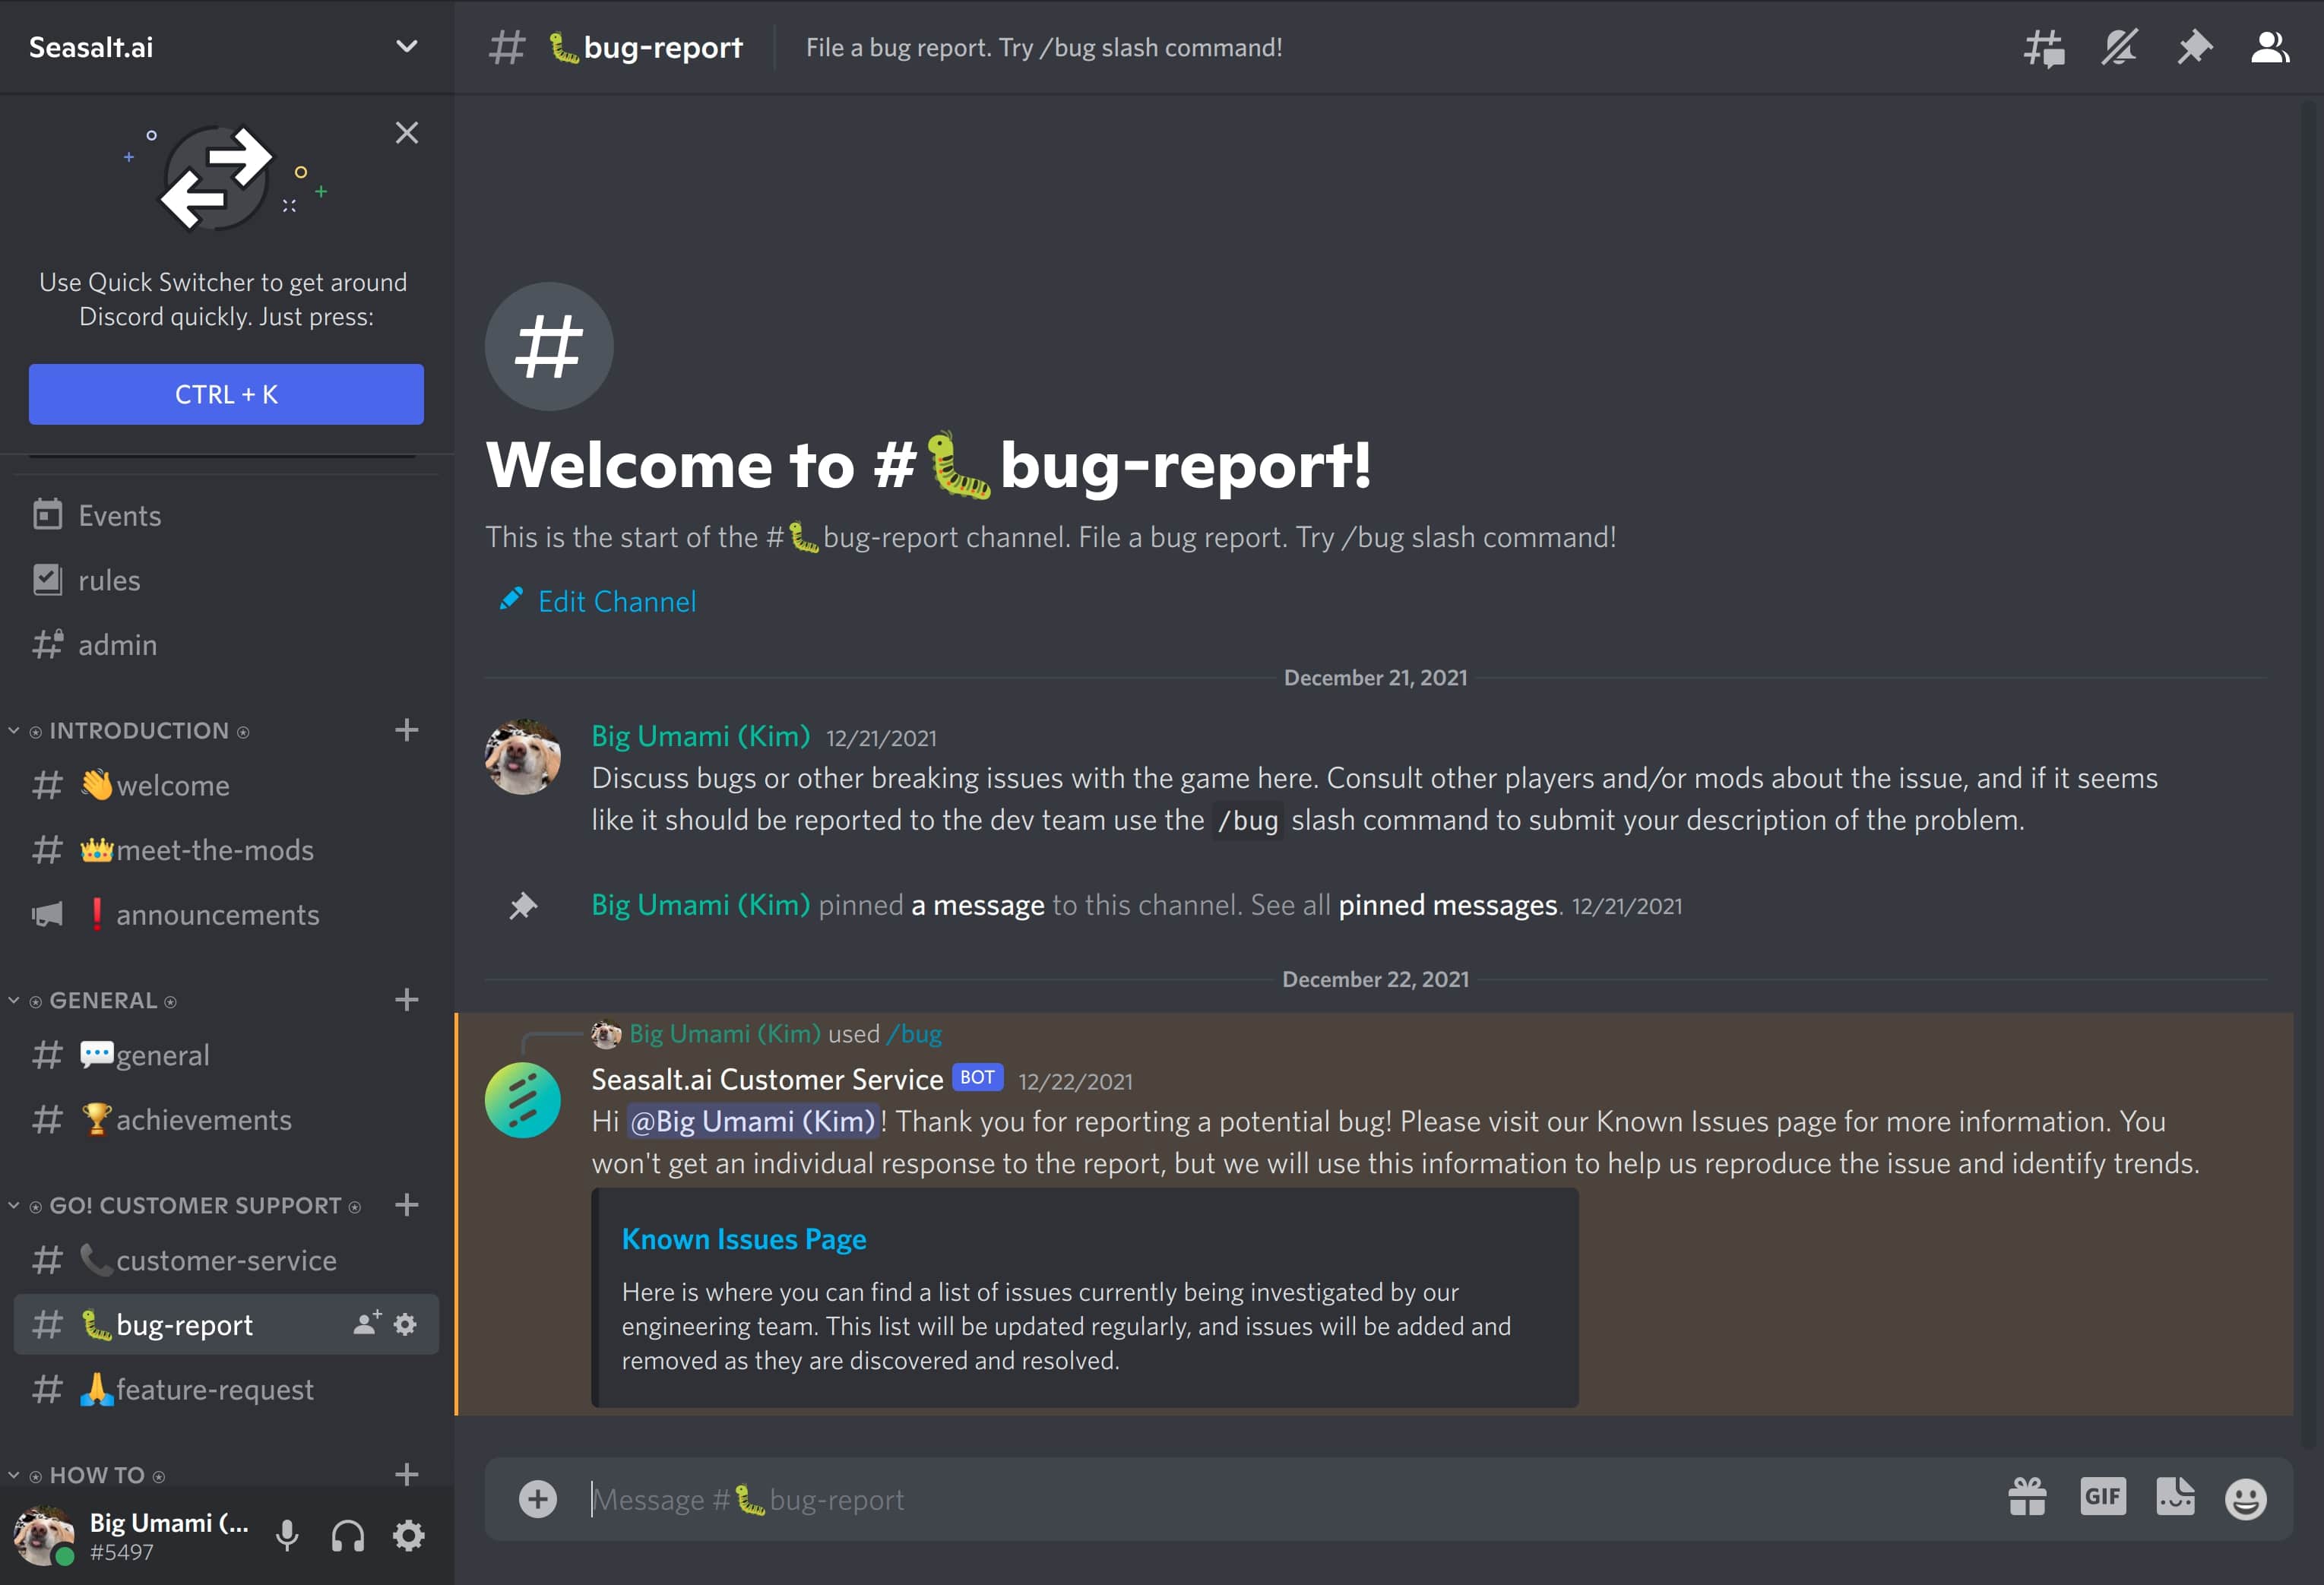 The bug report channel on the Discord server, featuring a submitted bug report.